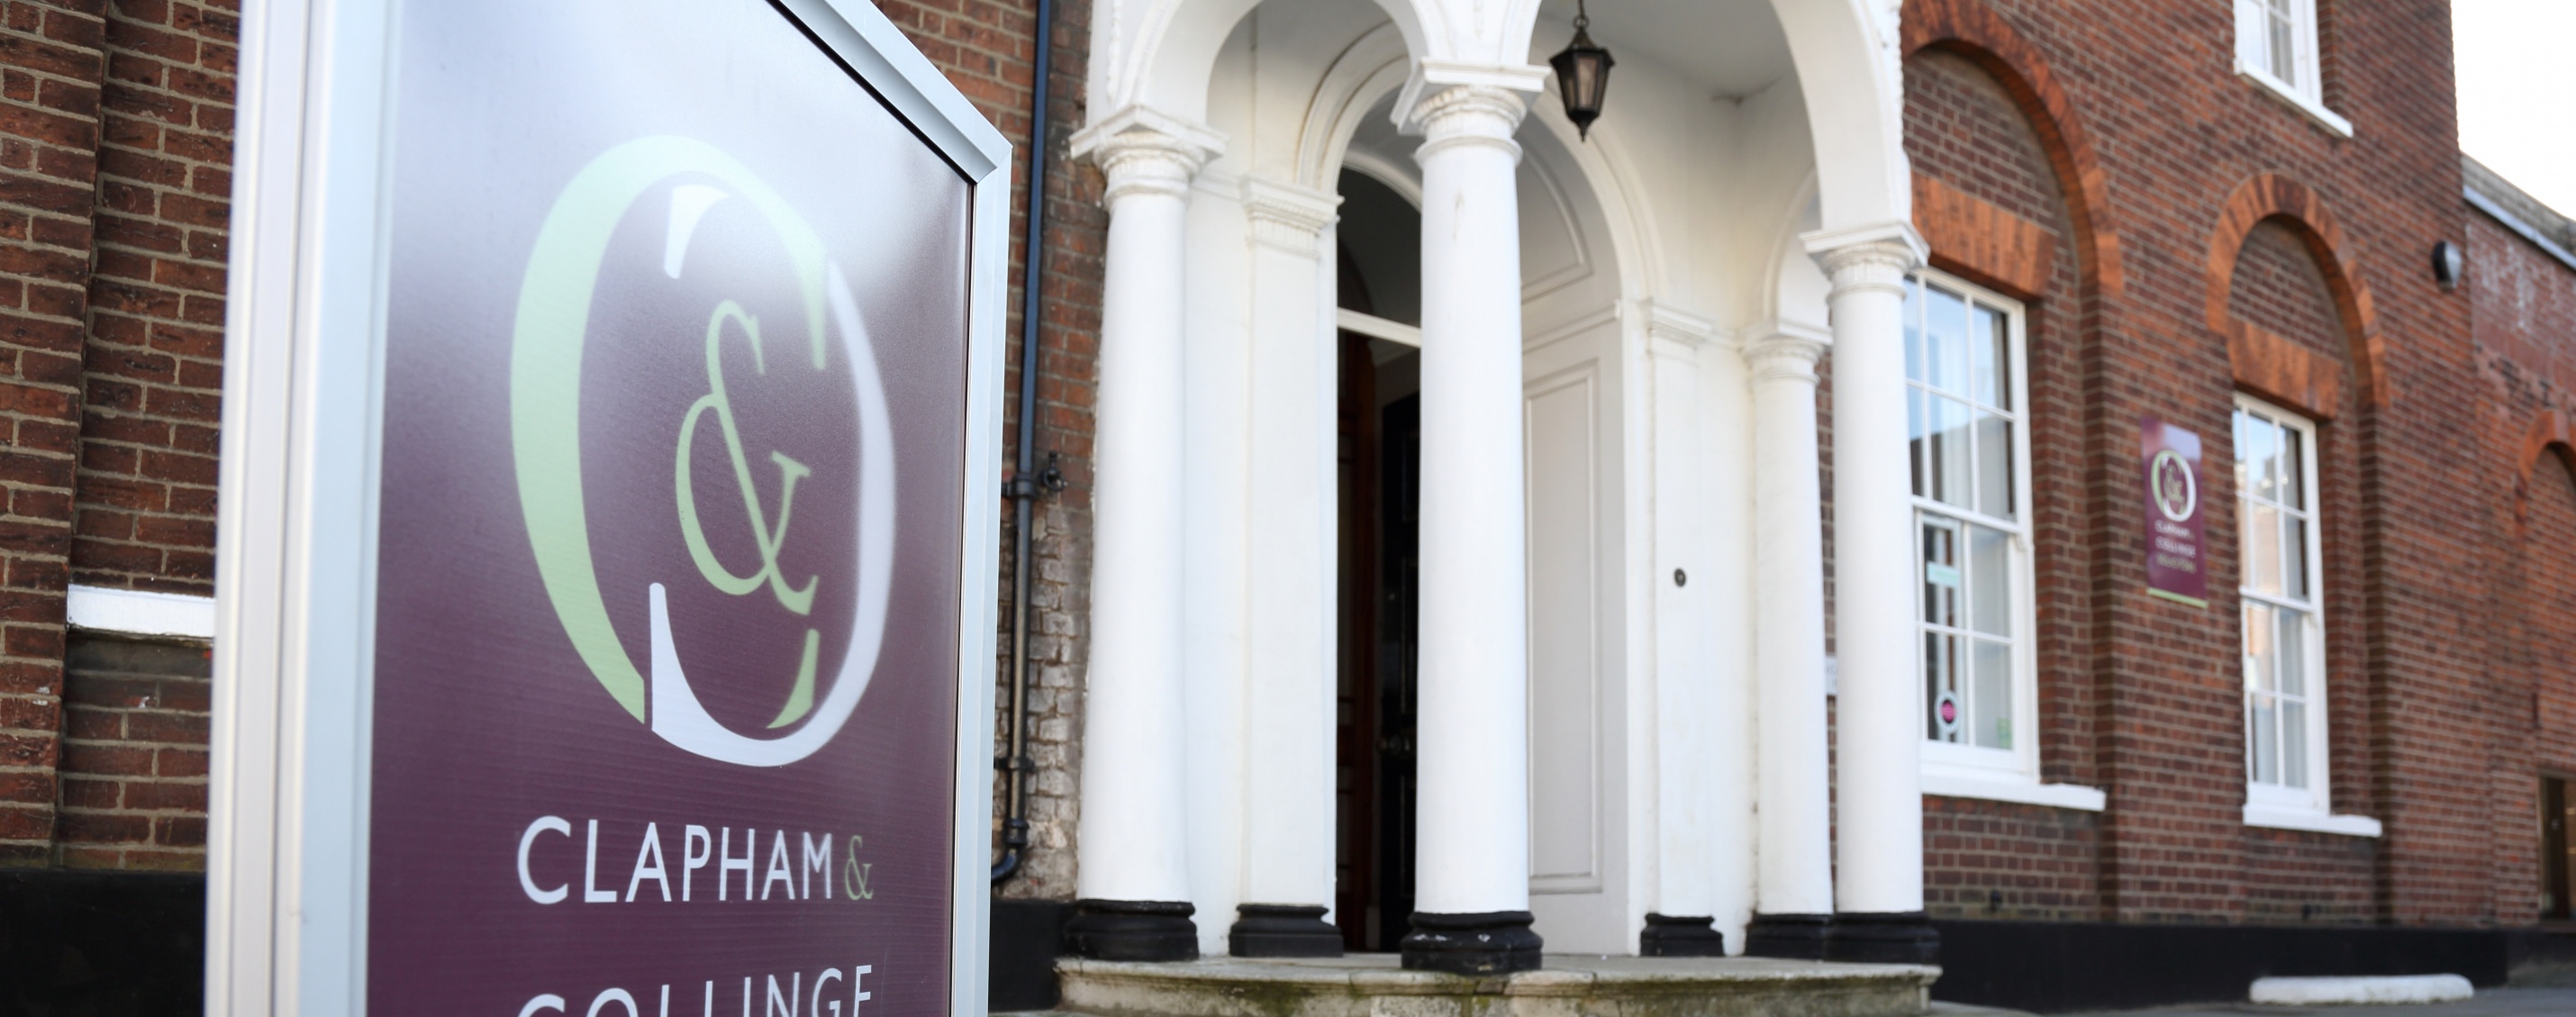 Solicitors in Norwich - Leading Norwich law firm